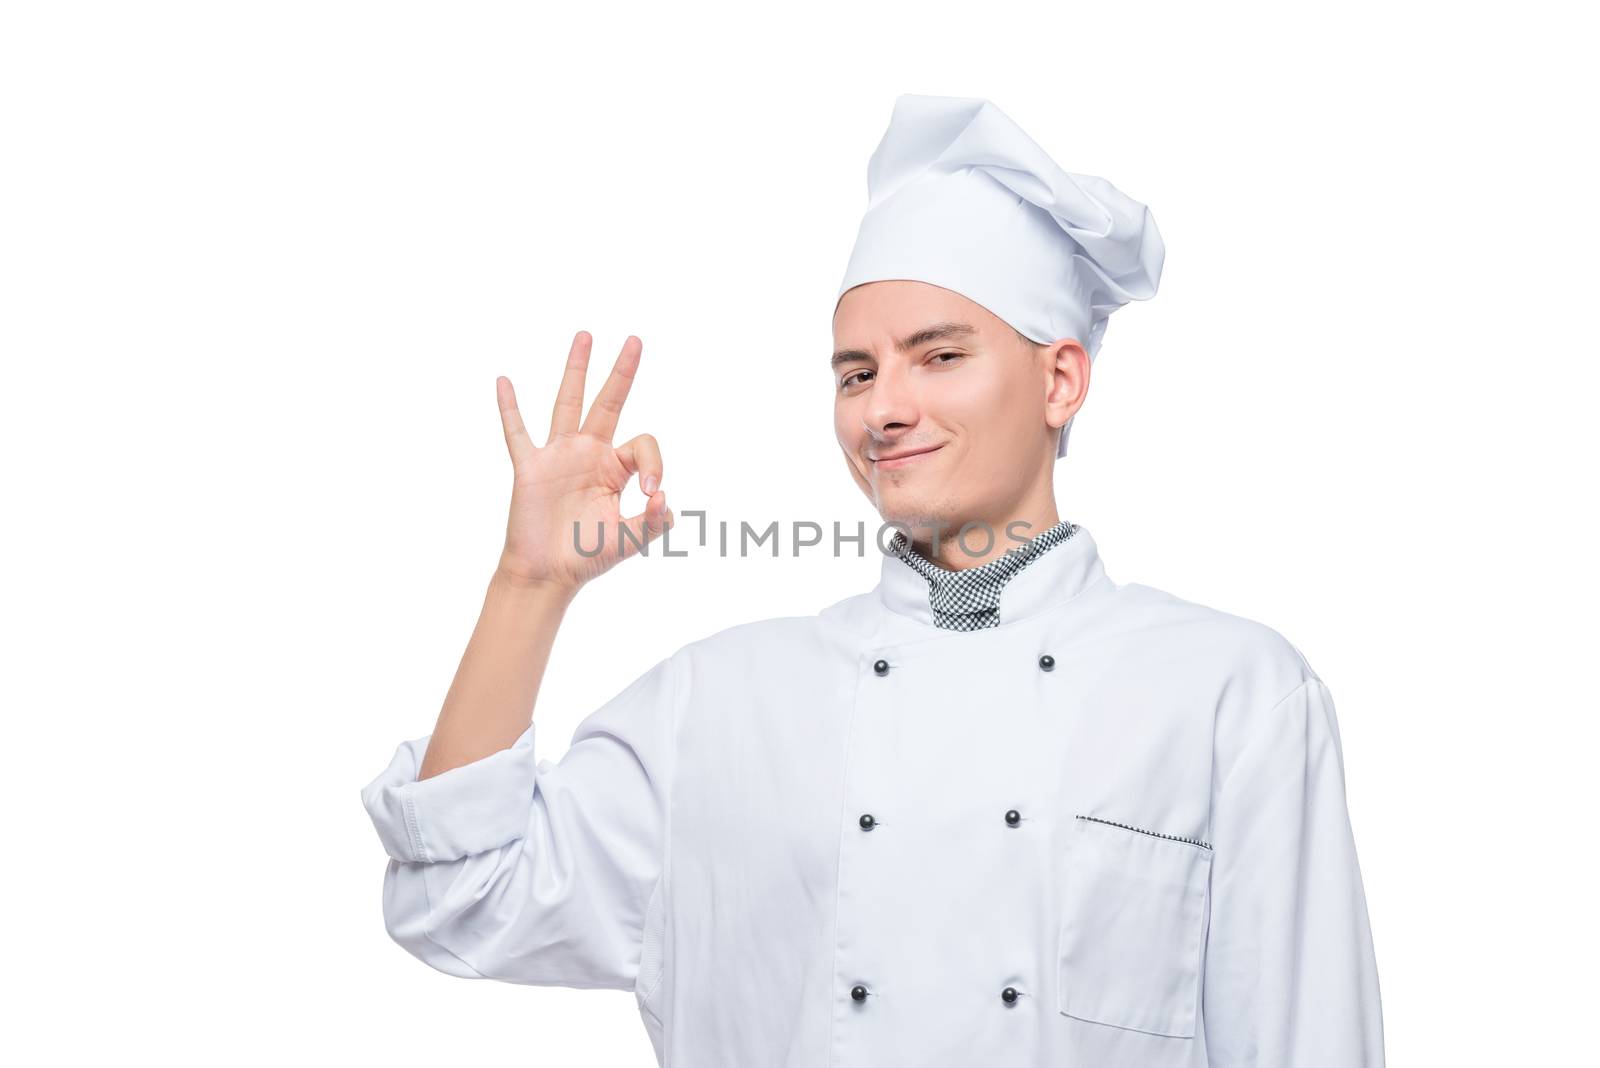 successful chef with hand gesture, portrait on white background by kosmsos111